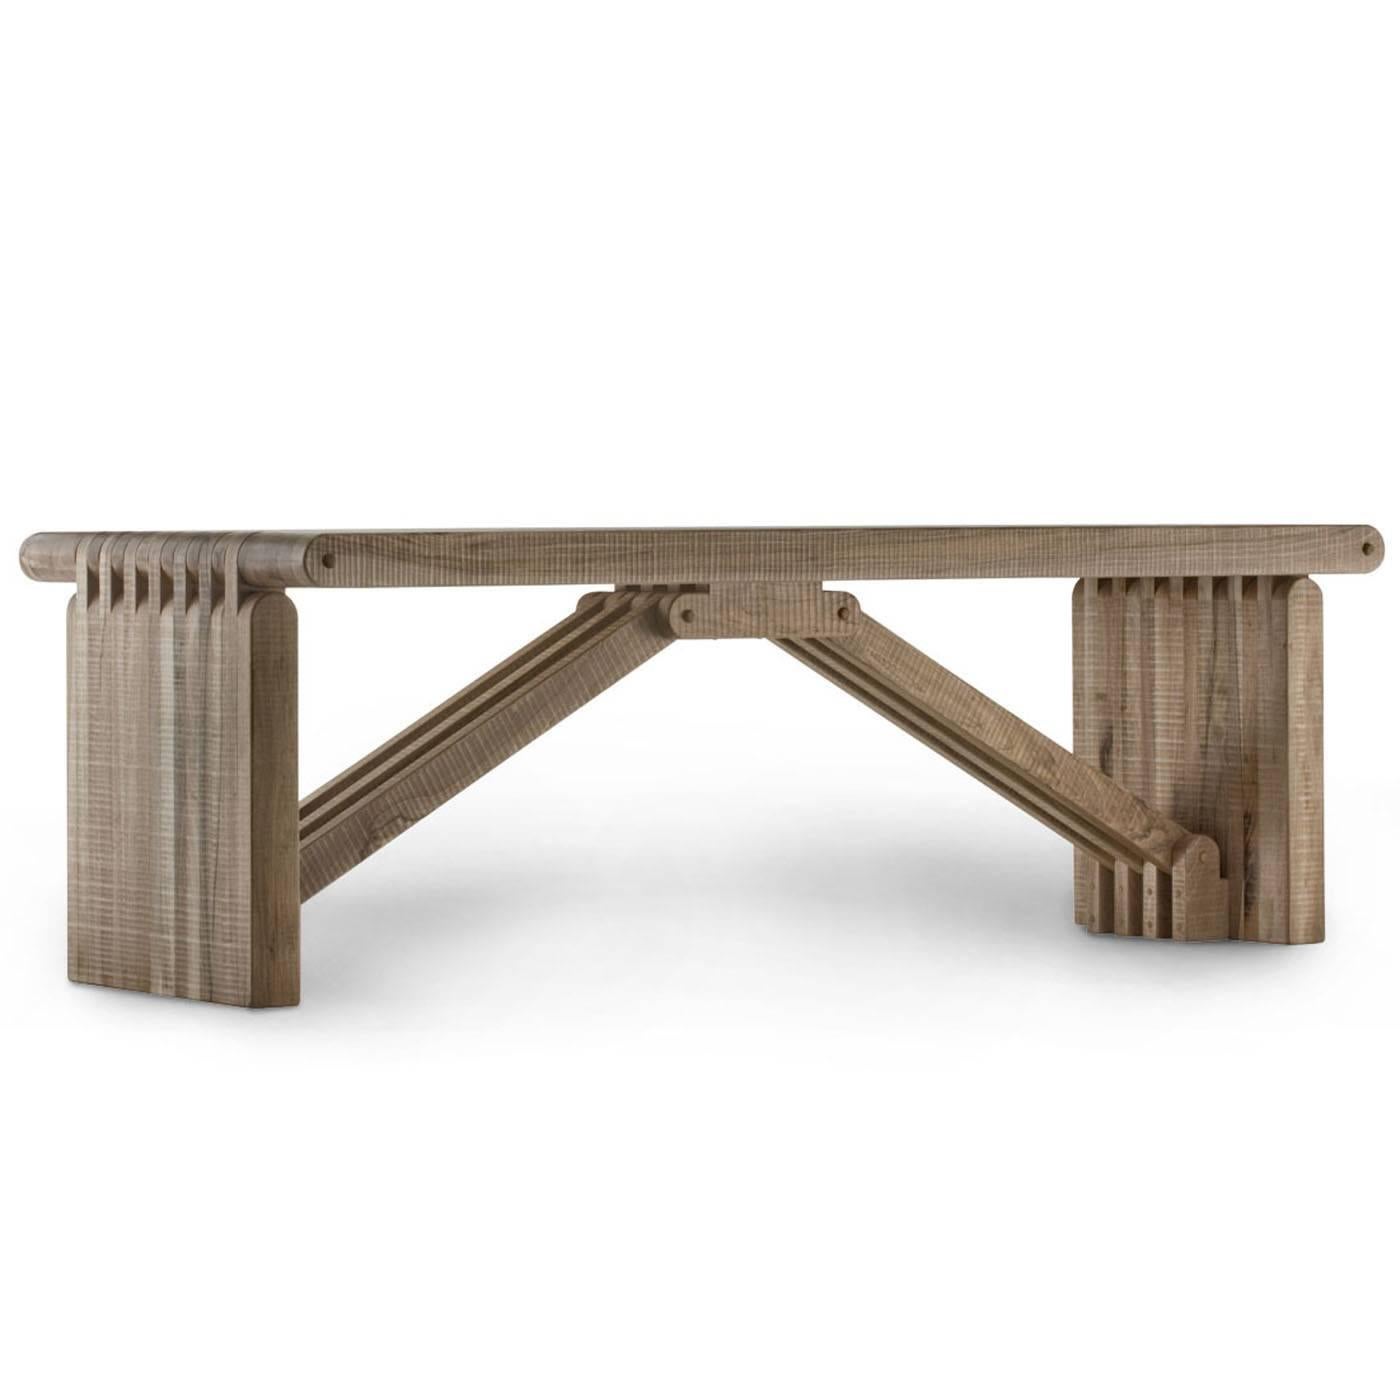 The structure of this exquisite table in Italian walnut is assembled with visible joints and pins and its surfaces are hand planed. The snap-fit technique with which this unique furniture object is obtained allows to create complex and strong